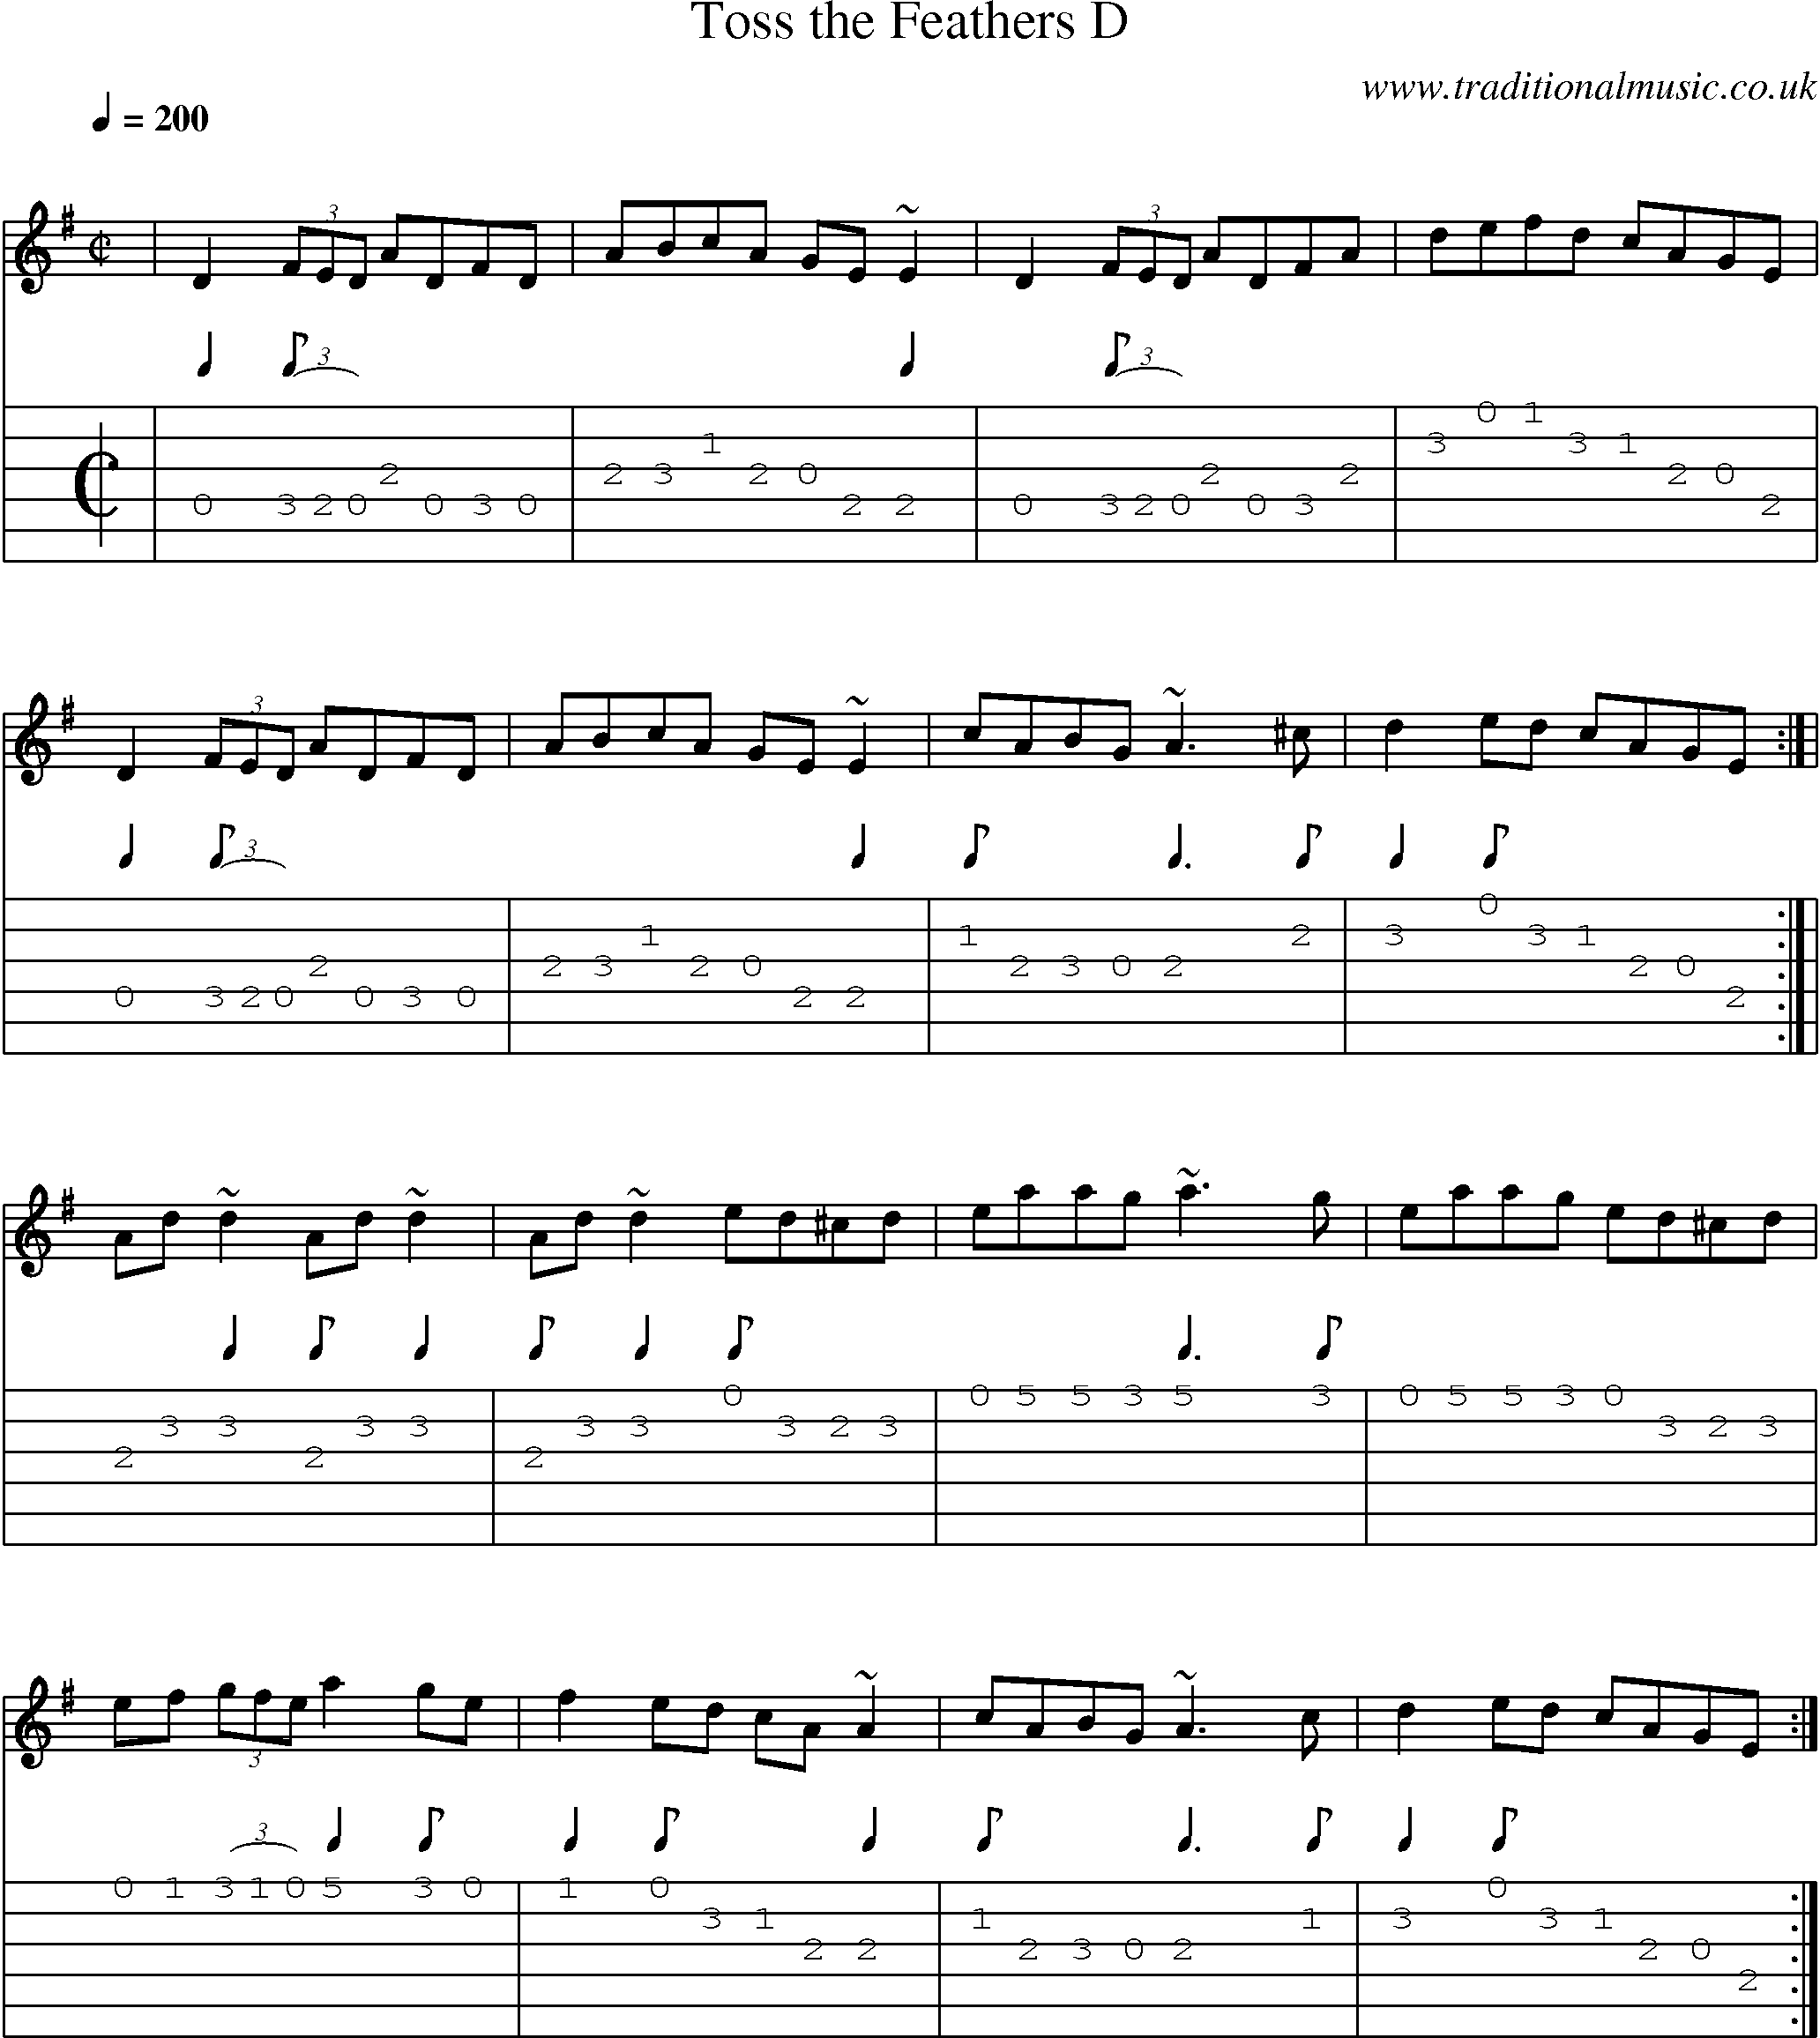 Music Score and Guitar Tabs for Toss Feathers D